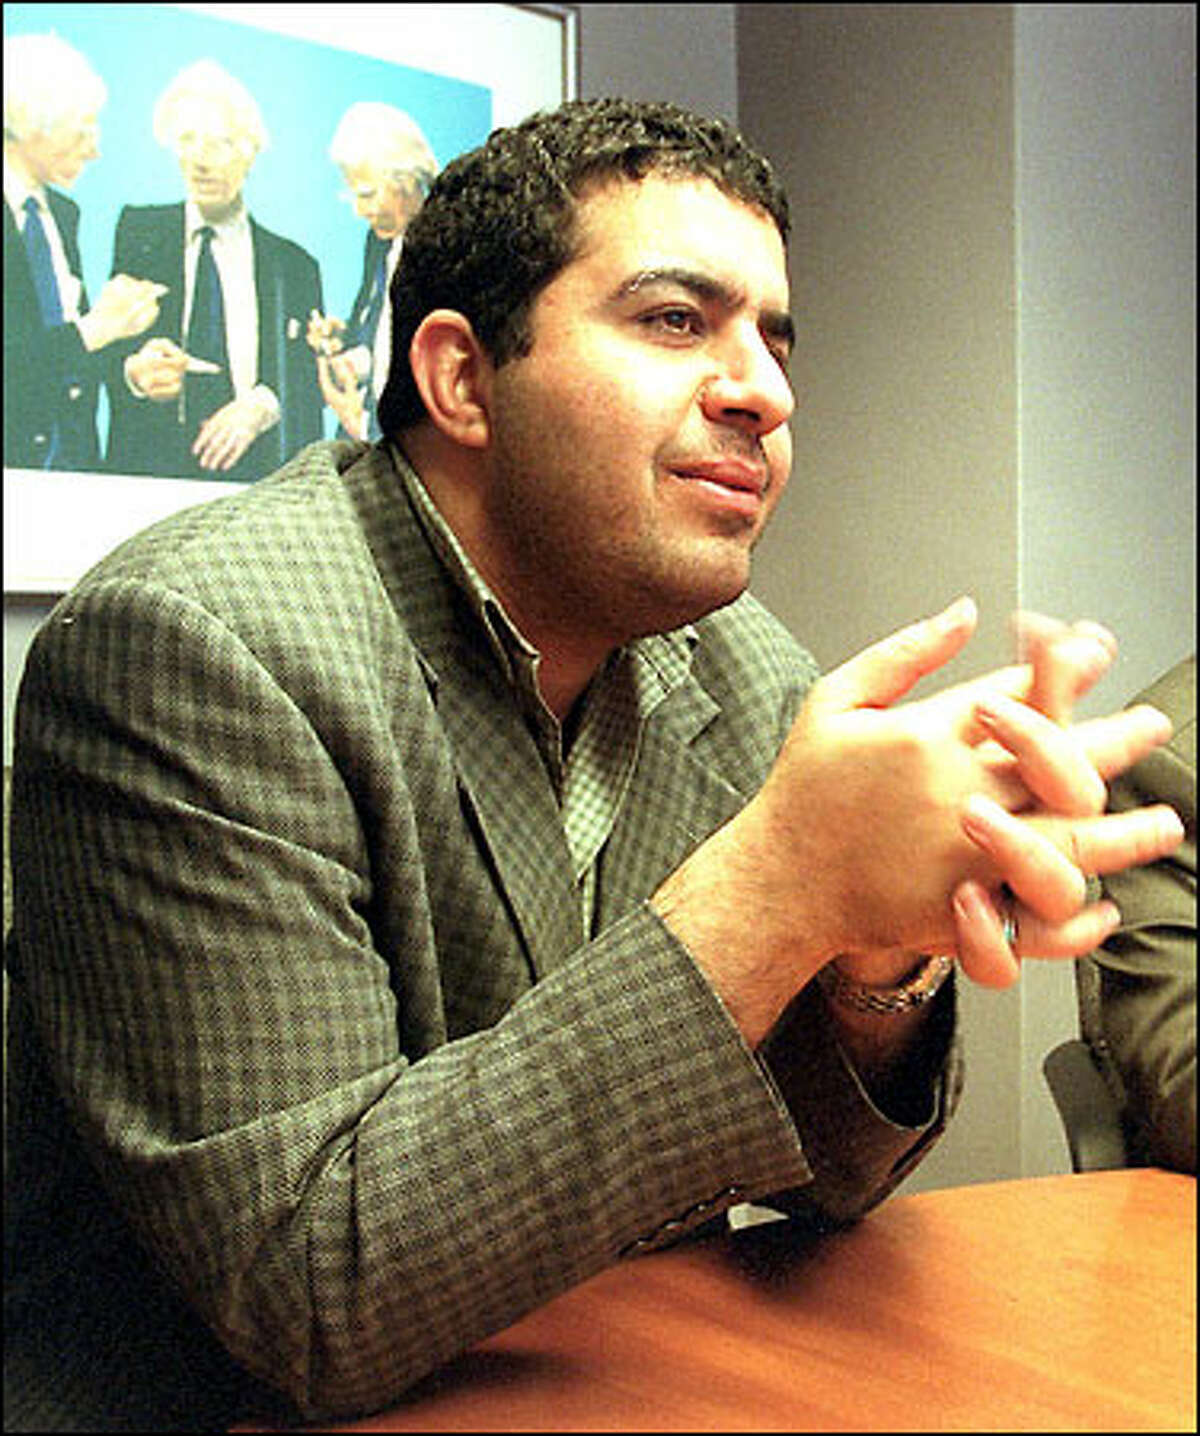 Hussein Alshafei, pictured in a 2002 file photo. Alshafei was convicted of money laundering then after sending funds to Iraq. He is slated to face a federal judge again Friday for new crimes.